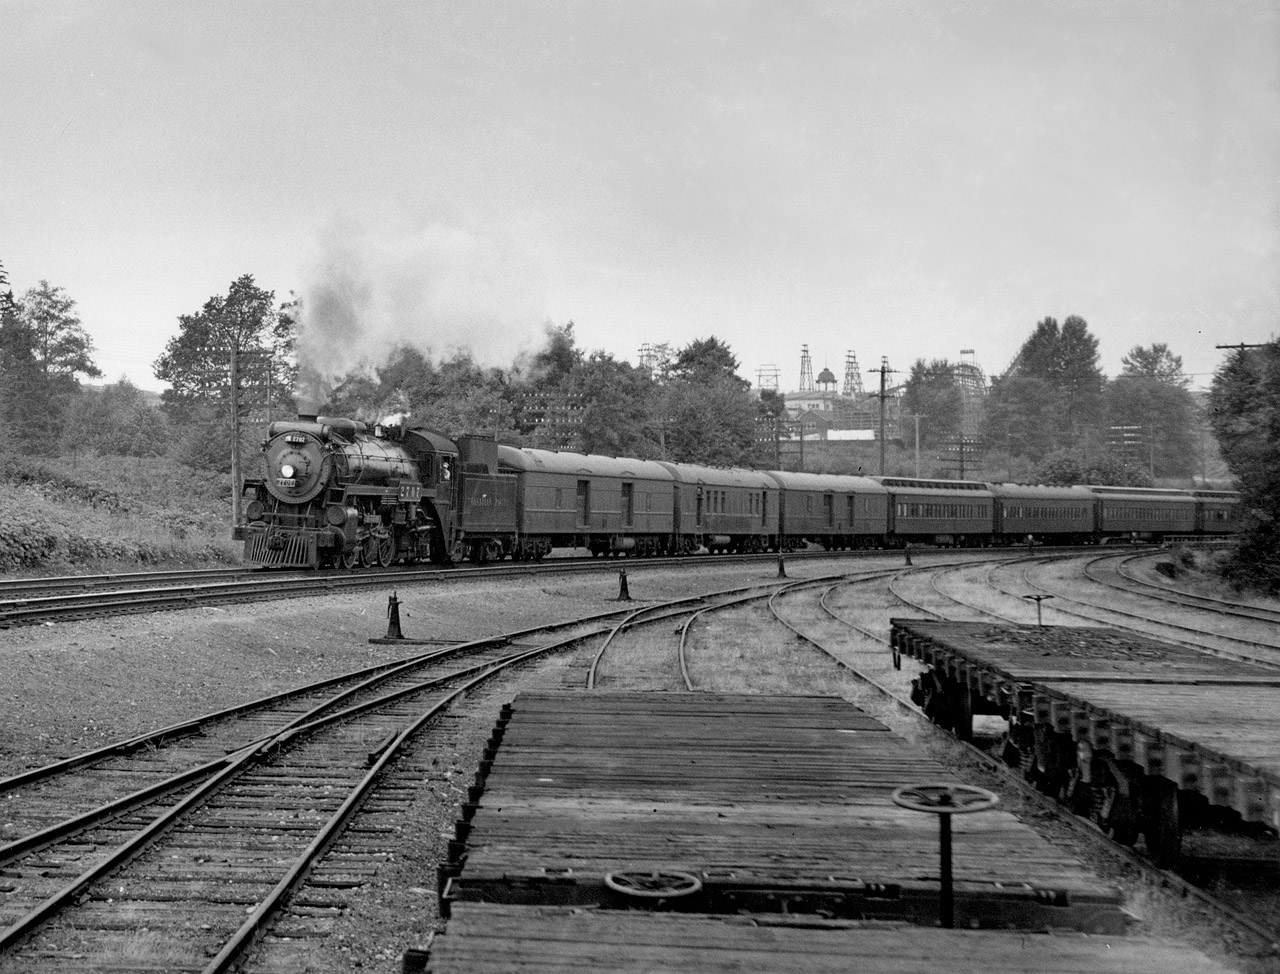 Train no. 2 with engine 2707, four miles east of Vancouver.